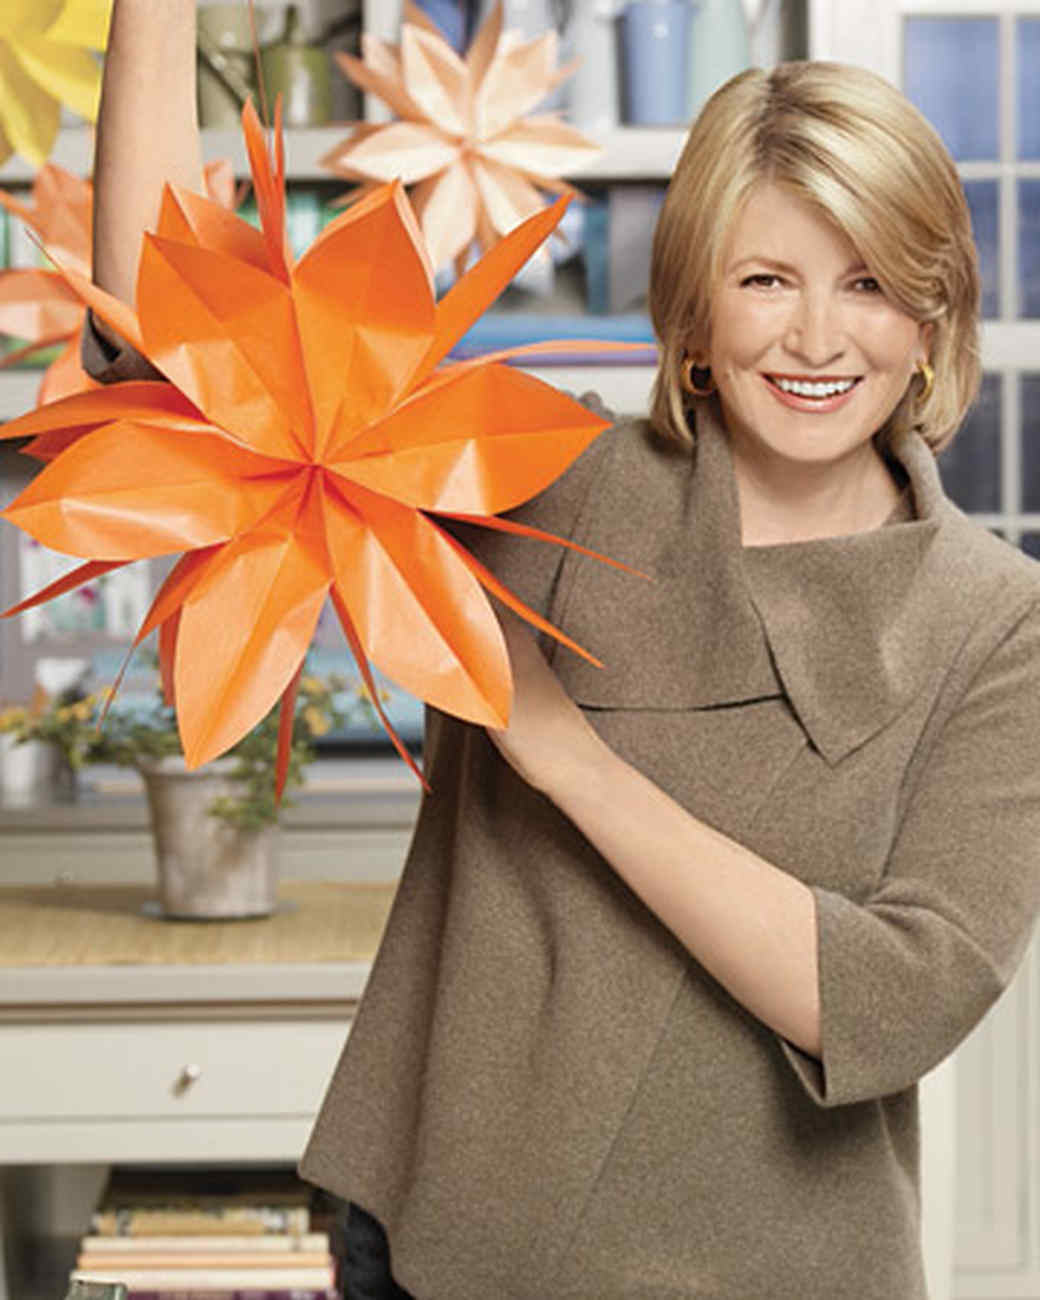 Martha Stewart Hands Off Magazines' Business Operations to Meredith